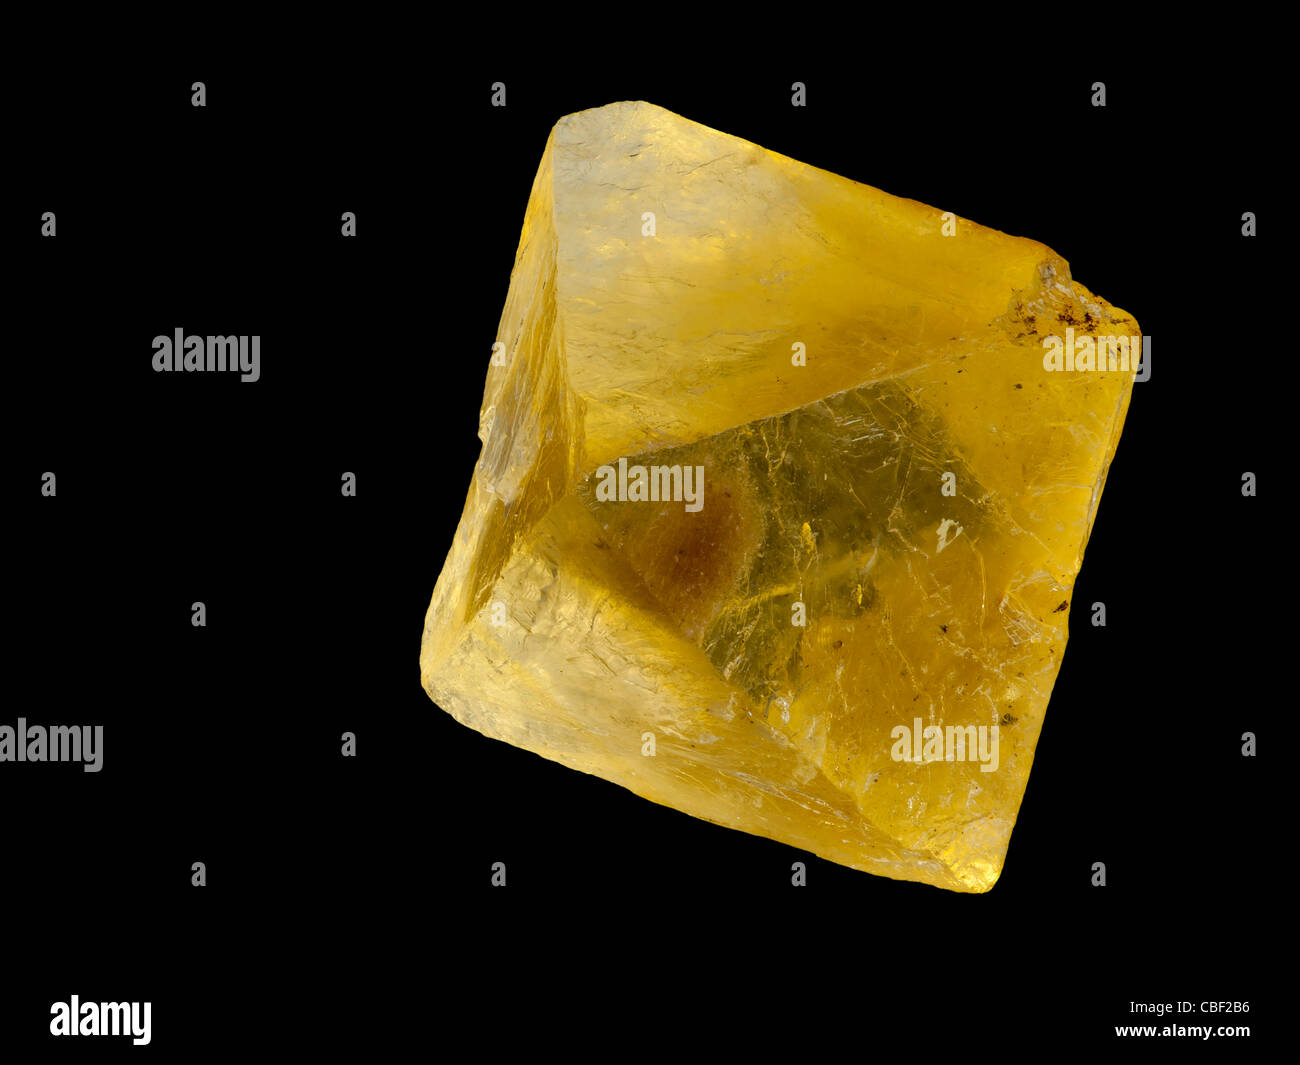 Cubic fluorite (CaF2) crystal isolated on black background Stock Photo